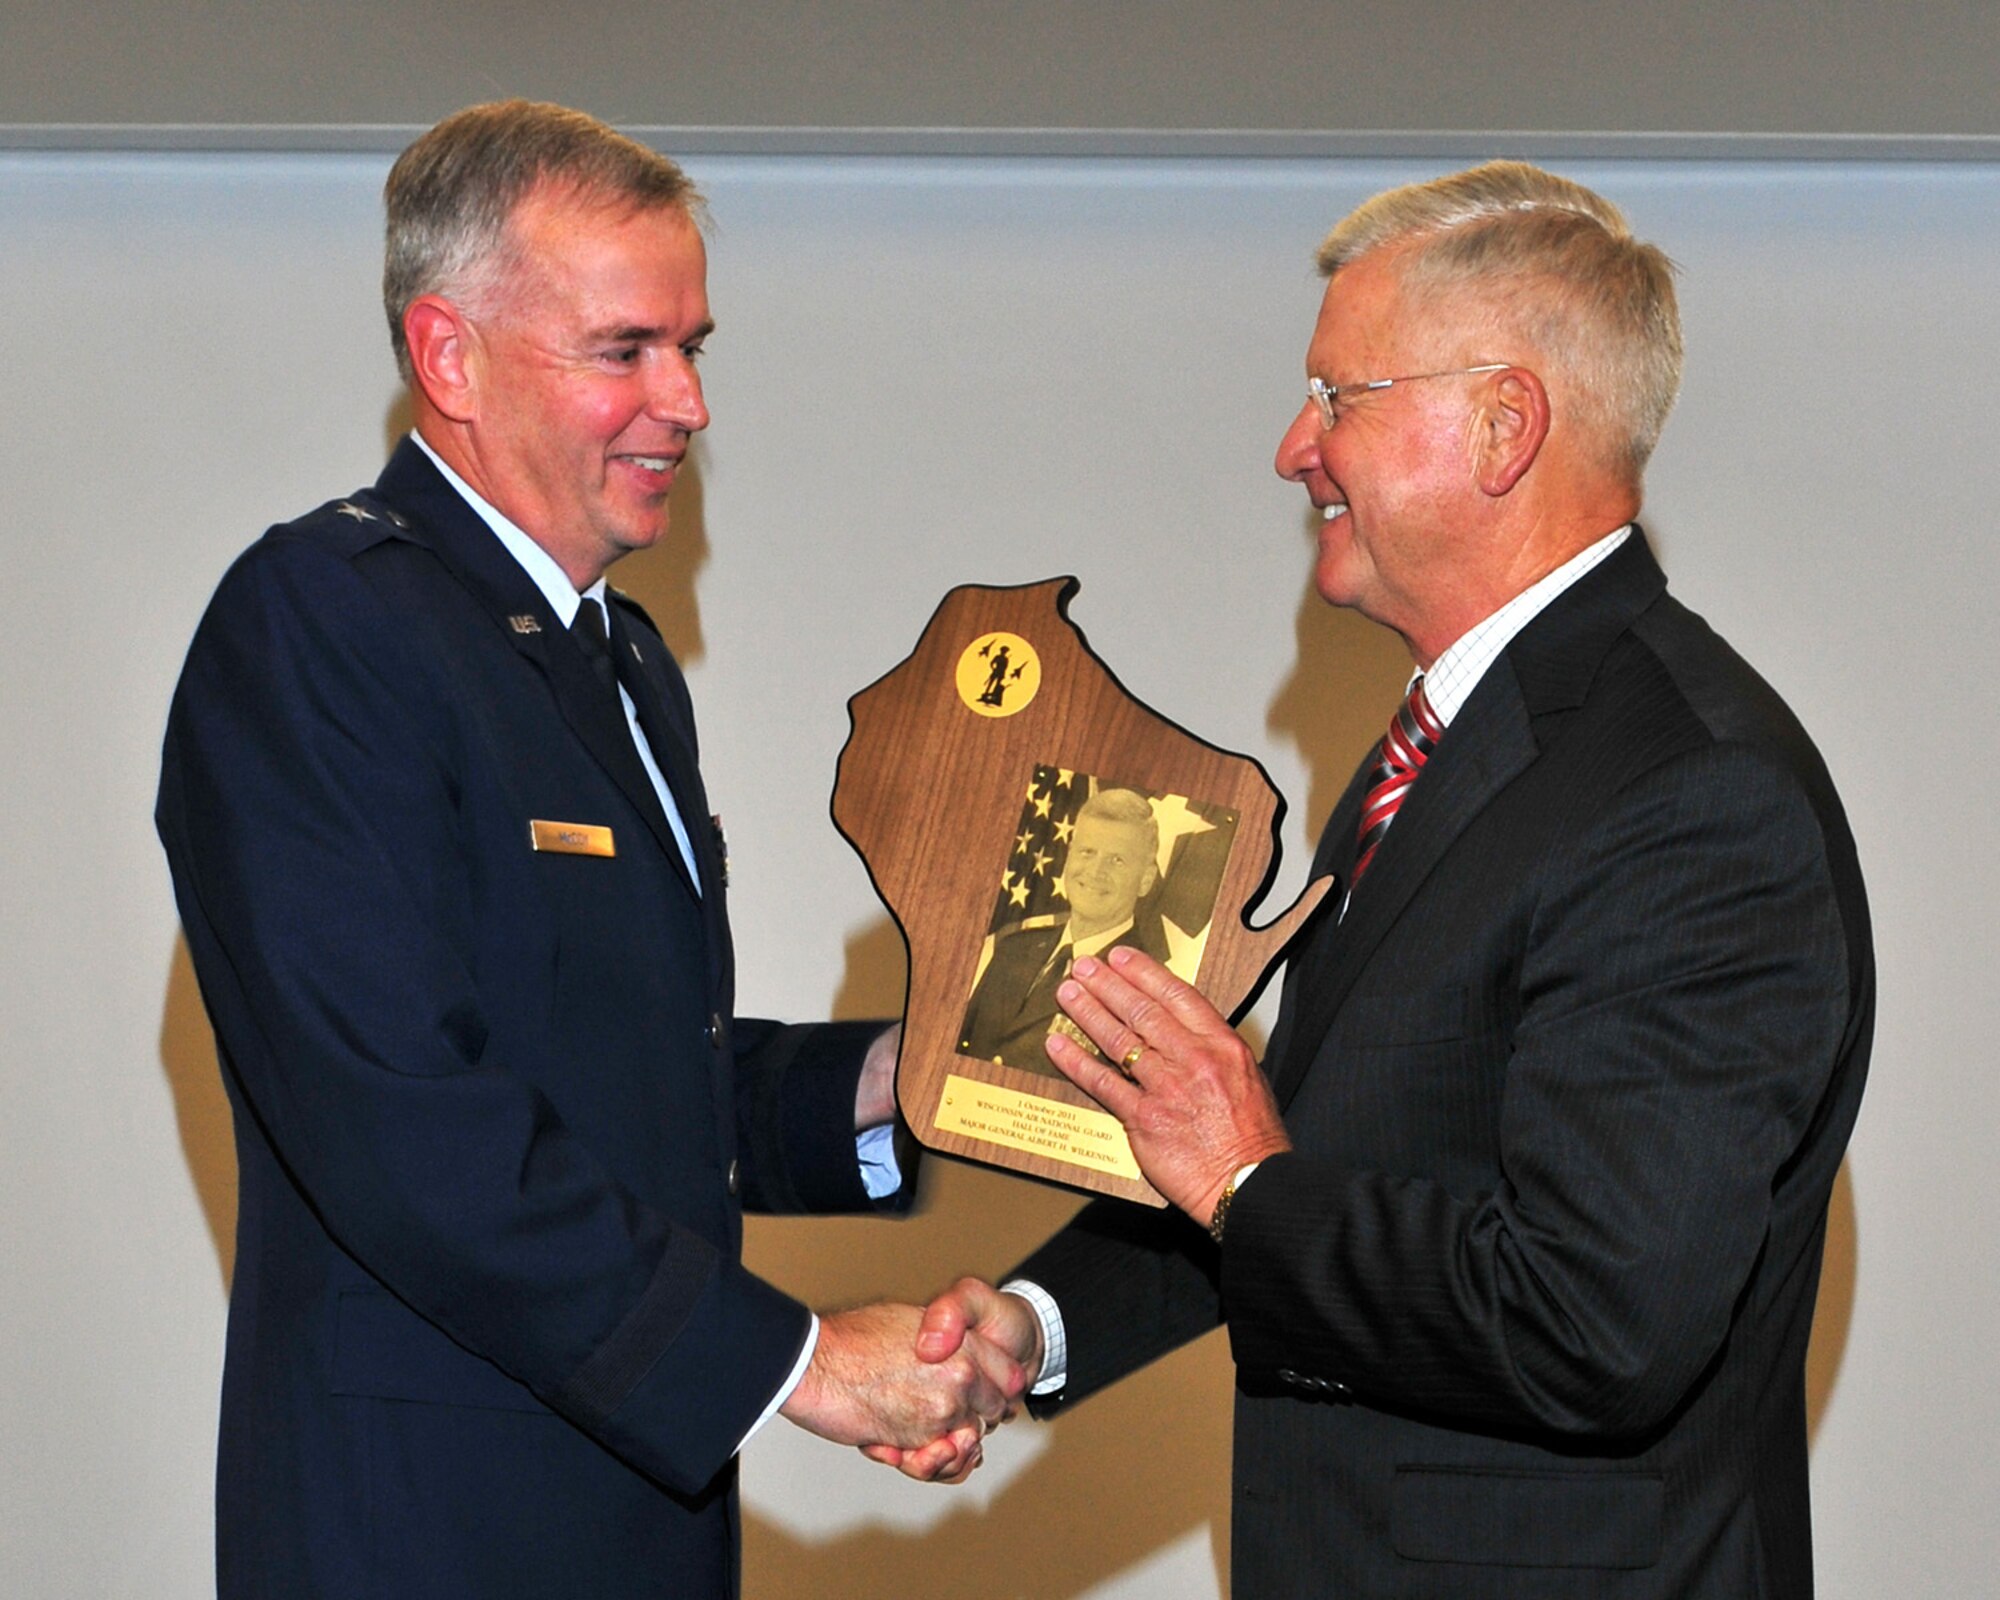 Retired Major Generals Albert H. Wilkening and Fred R. Sloan became the latest members of the Wisconsin Air National Guard Hall of Fame during an induction ceremony at Truax Field, ANGB on Saturday October 1st, 2011. The Wisconsin Air National Guard Hall of Fame was established on June 15th 1982 to honor the special contributions Air National Guard members make to the overall success of the Wisconsin National Guard mission. (USAF photo by MSgt Paul Gorman)    